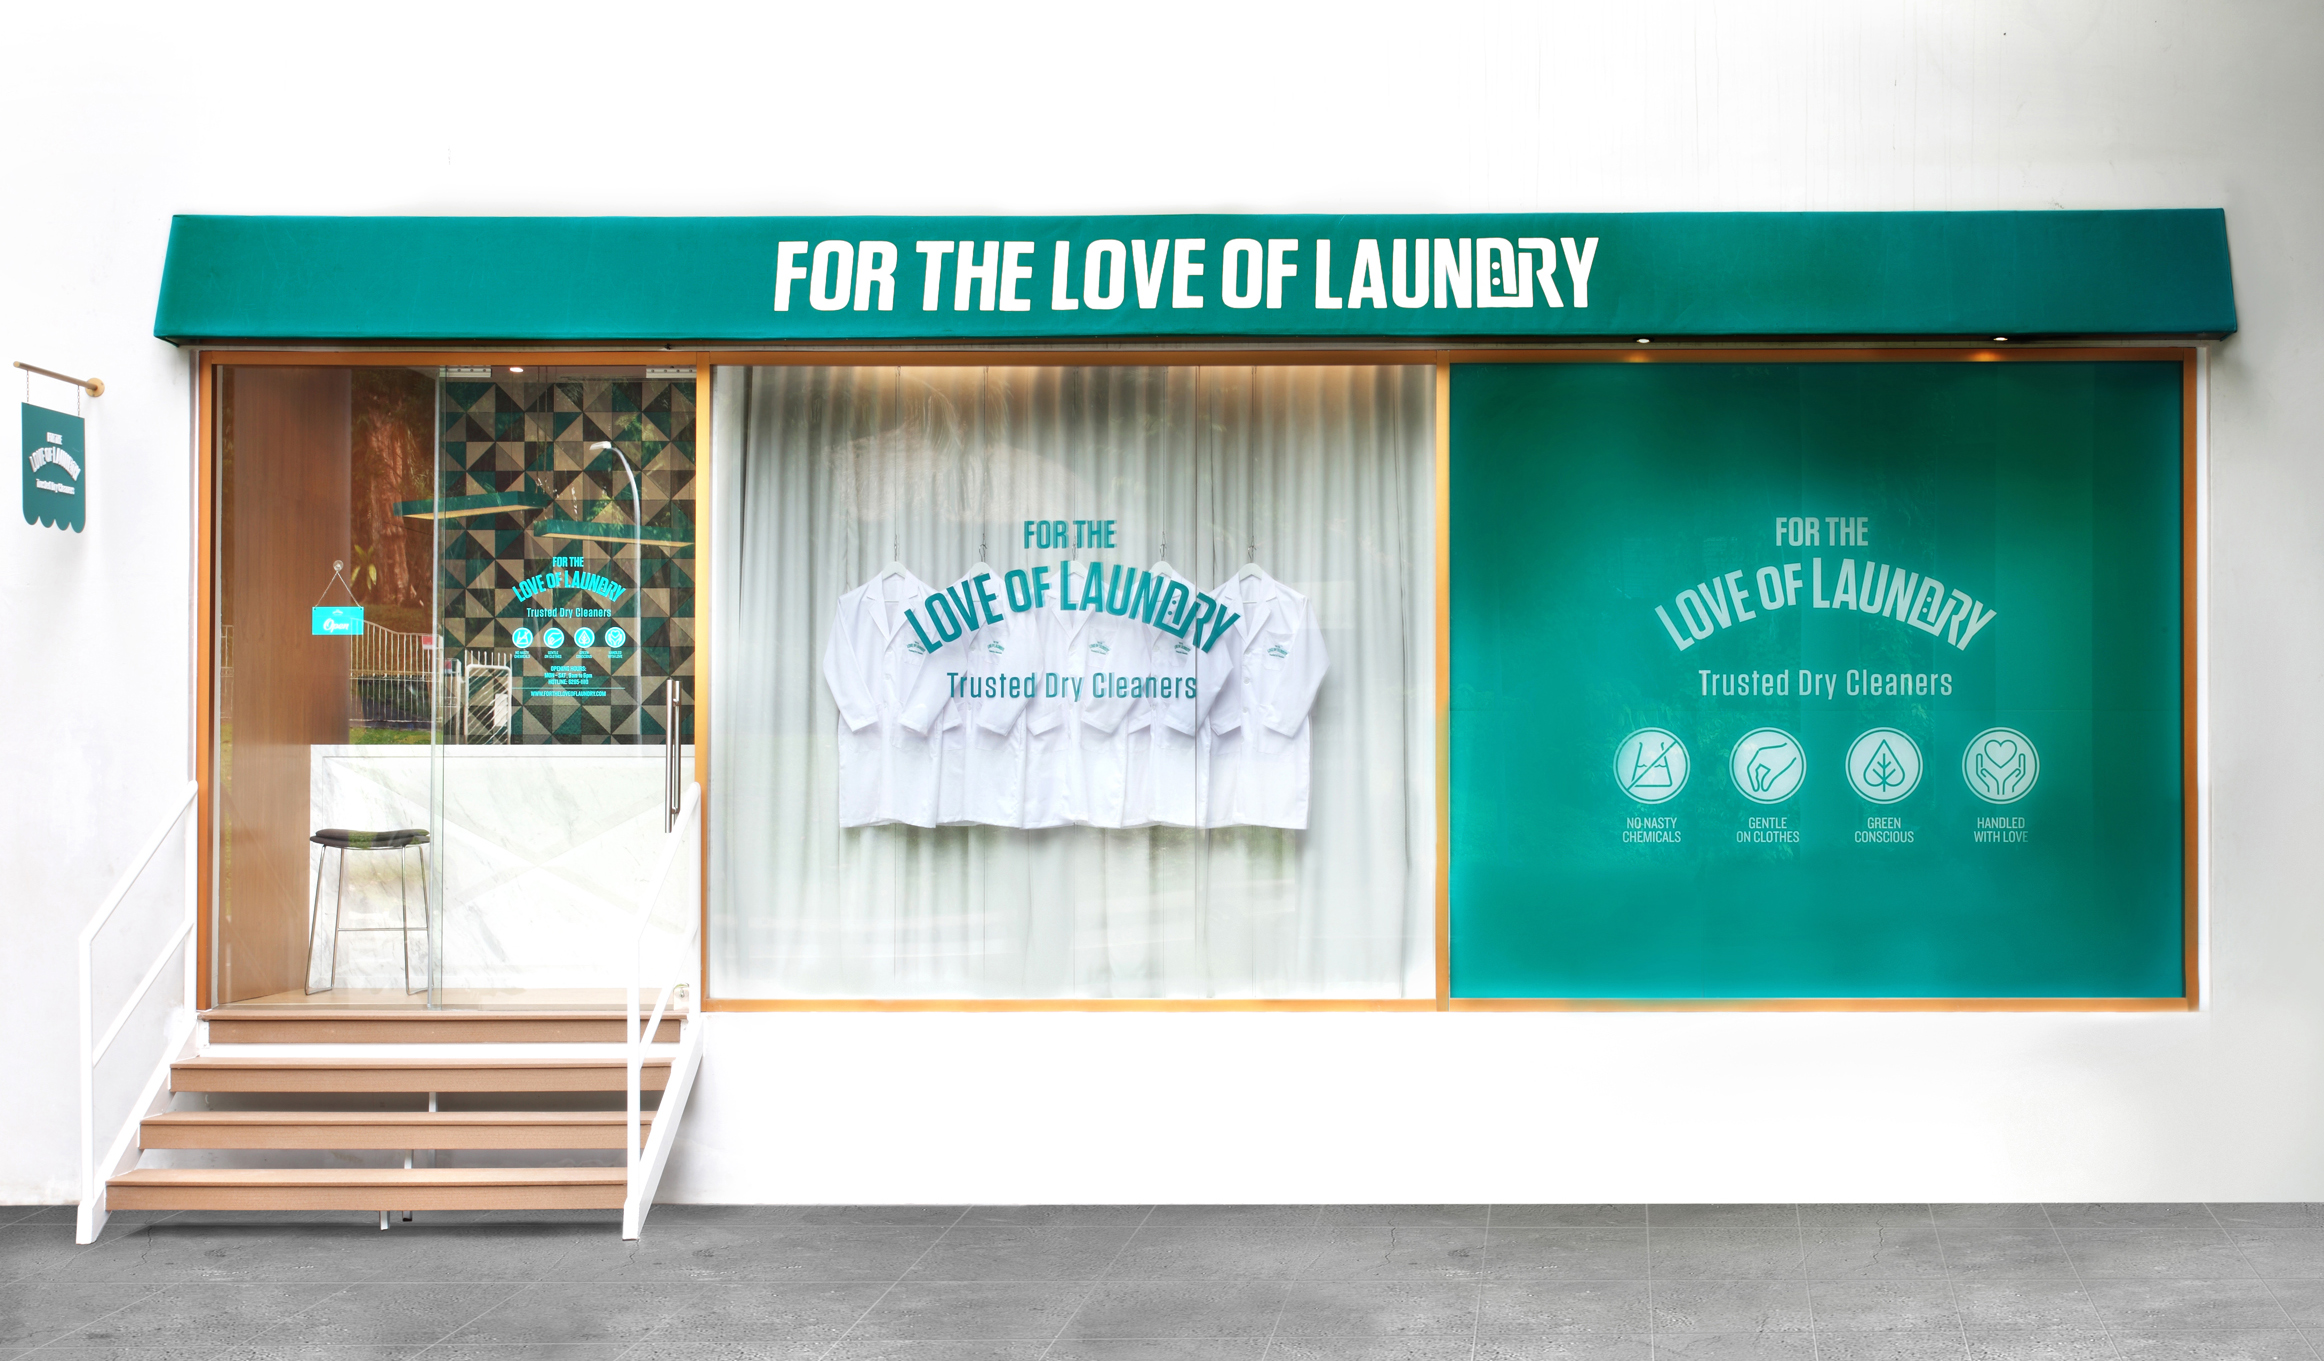 For the Love of Laundry Pte Ltd